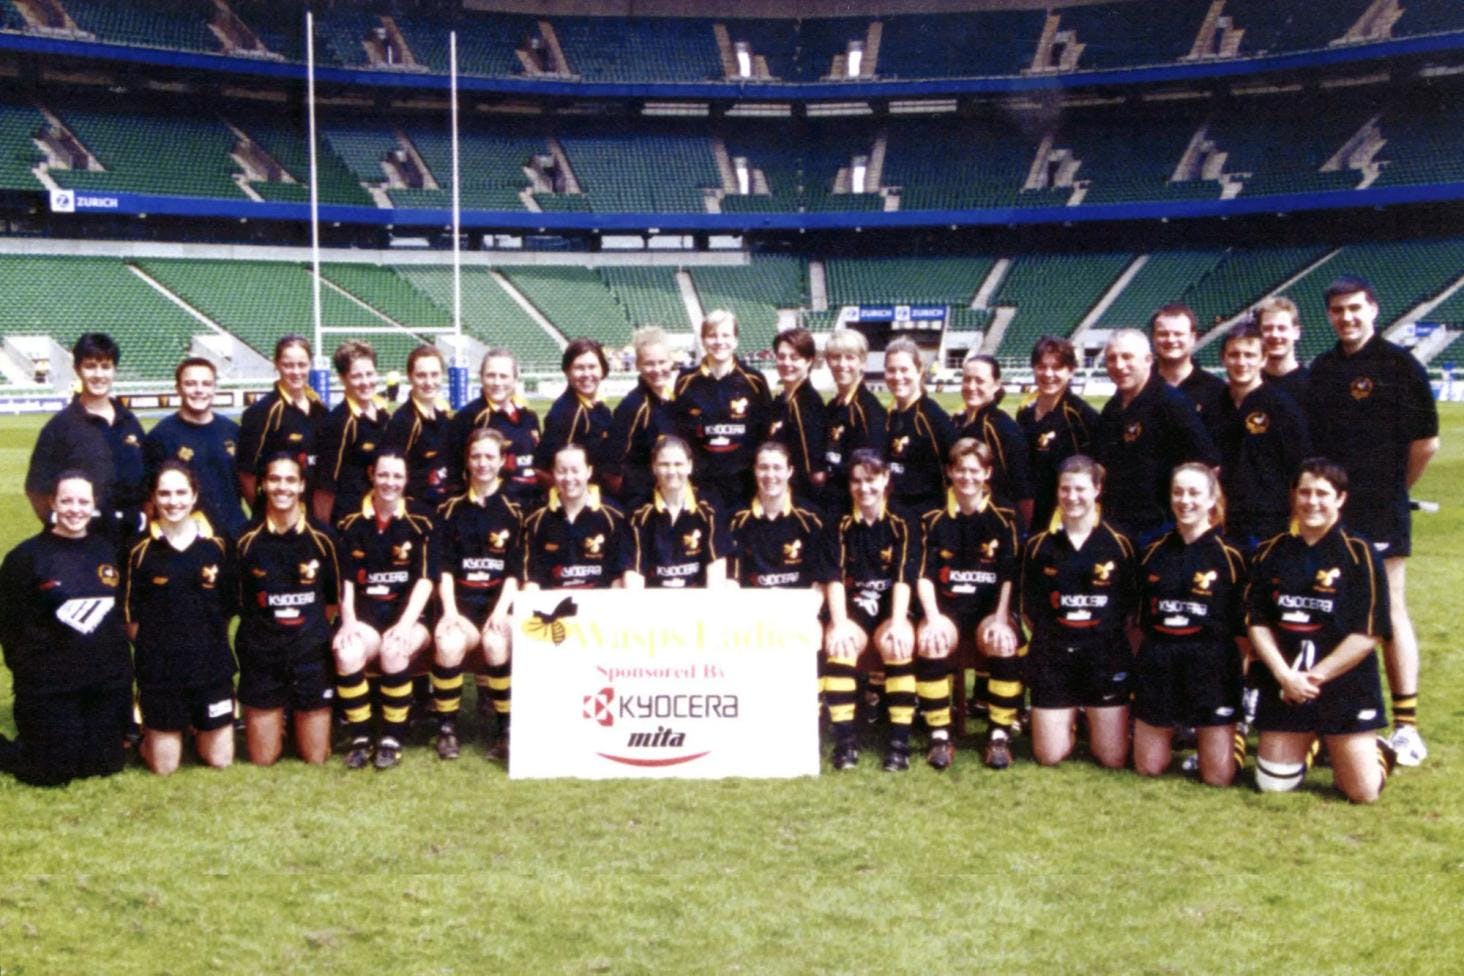 Wasps Women's Rugby 1997 National Cup Final Twickenham